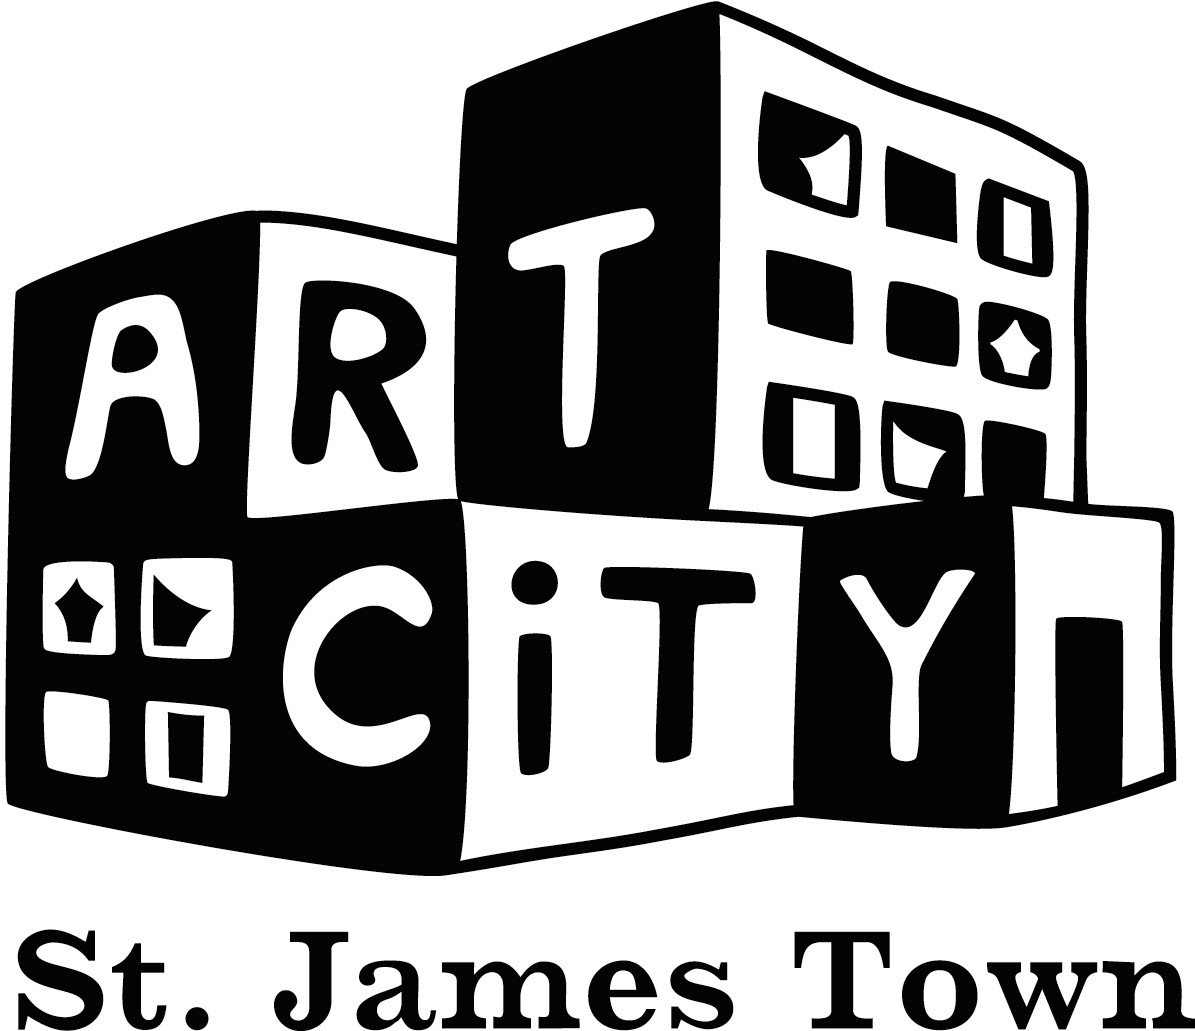 Art City in St. James Town